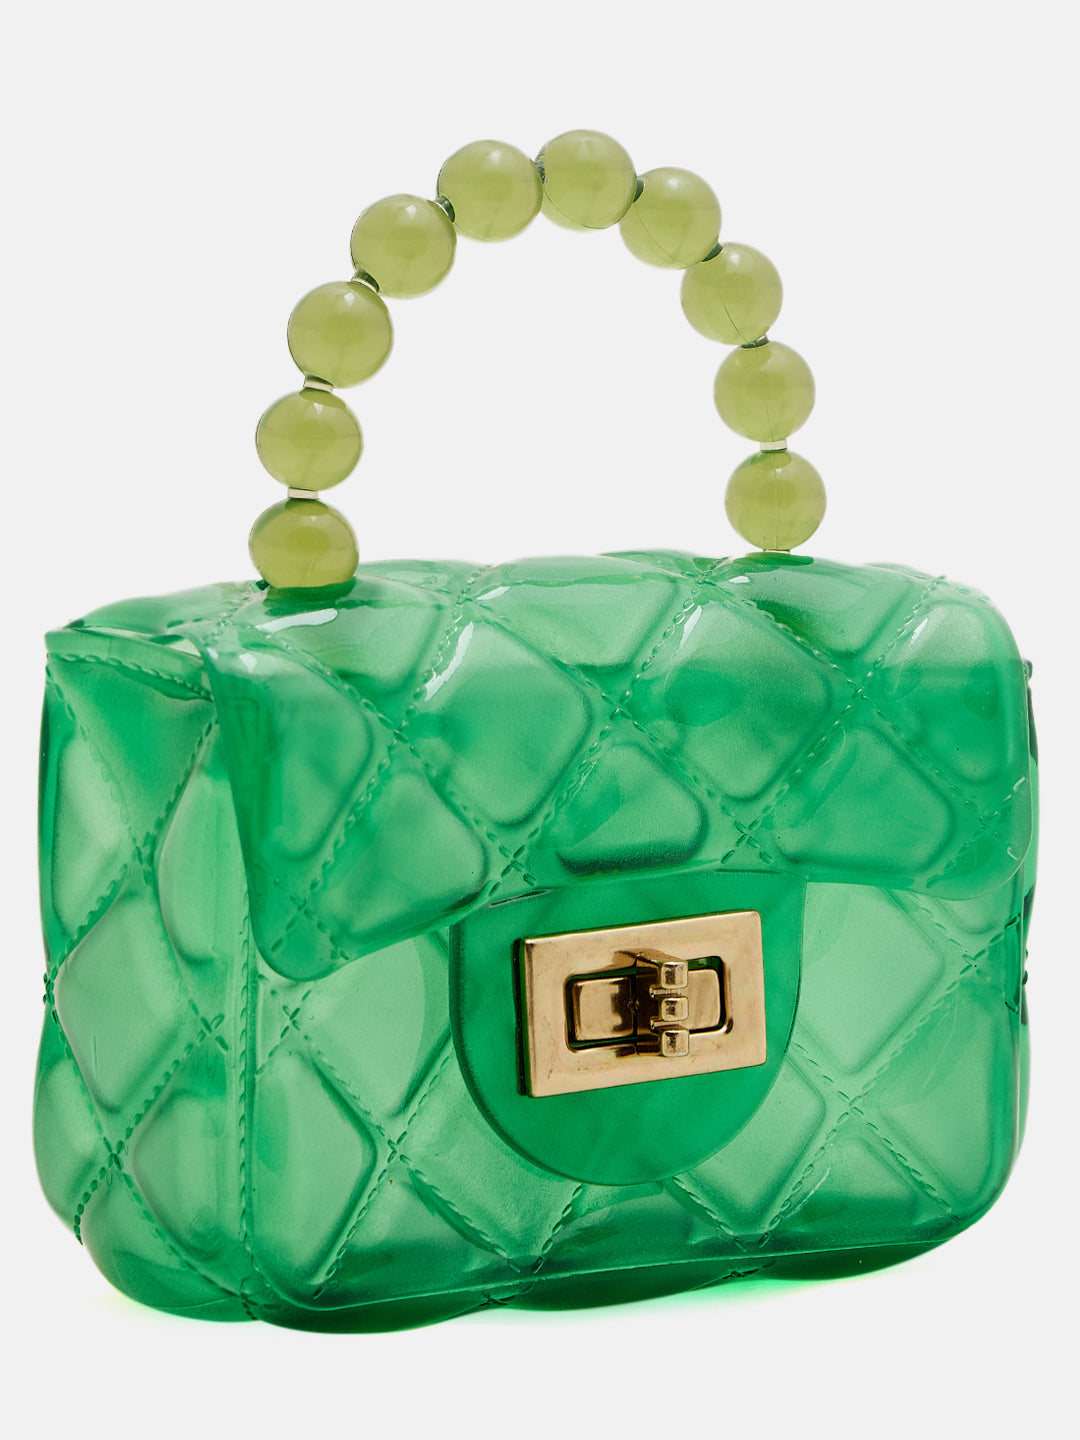 Athena Green Textured Quilted Structured Handheld Bag - Athena Lifestyle